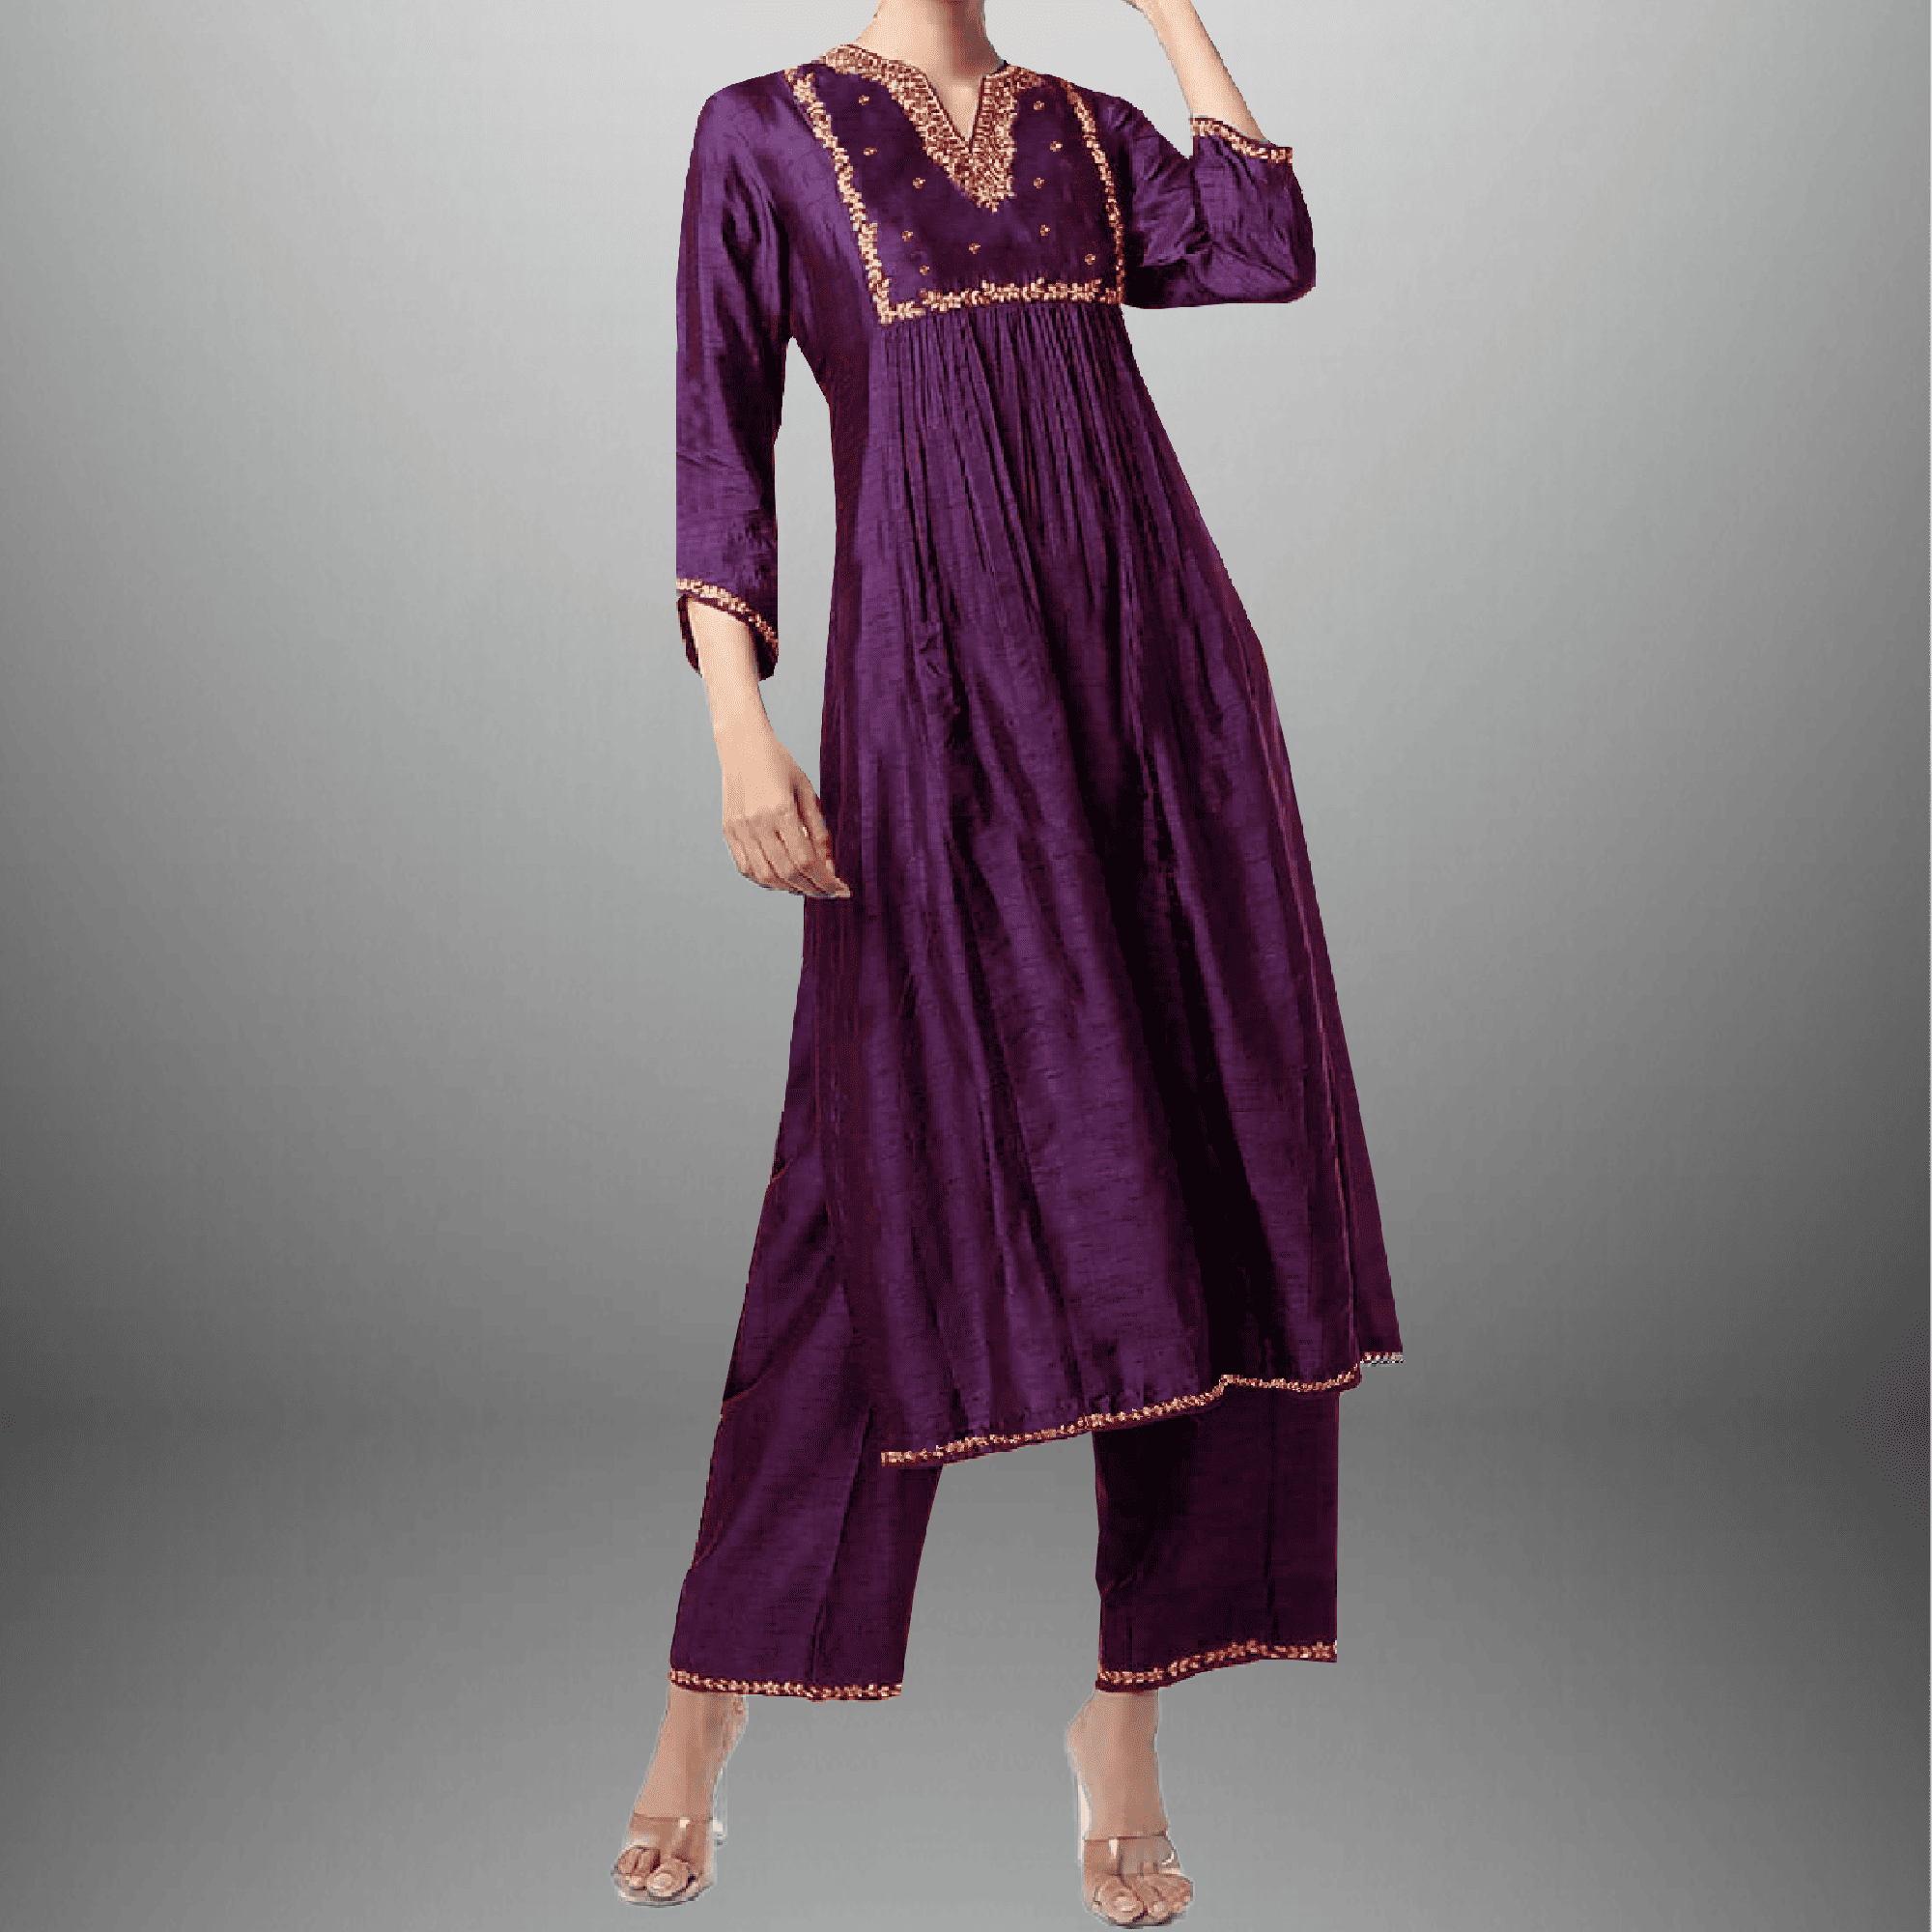 Women's Purple kurti with Golden embroidery and Golden lace border-RWKS043